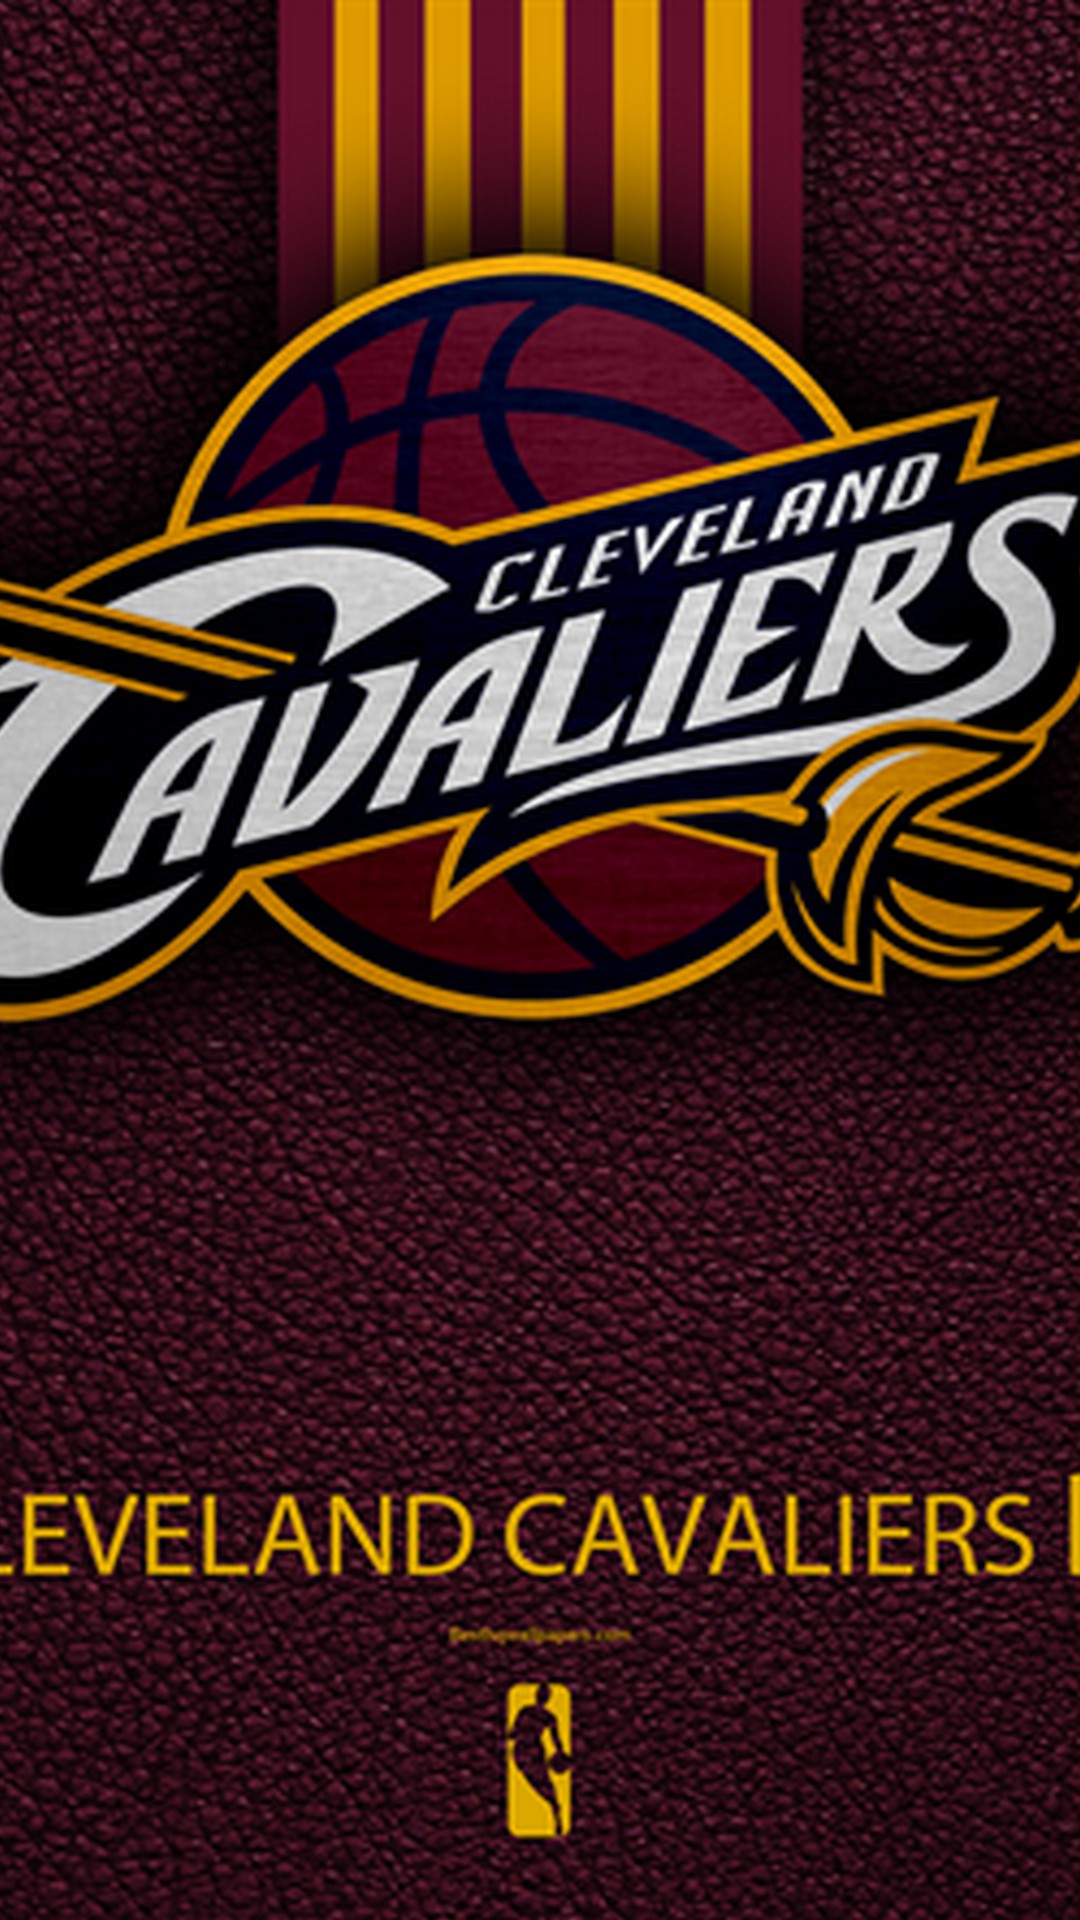 iPhone Wallpaper HD Cleveland Cavaliers With Resolution 1080X1920